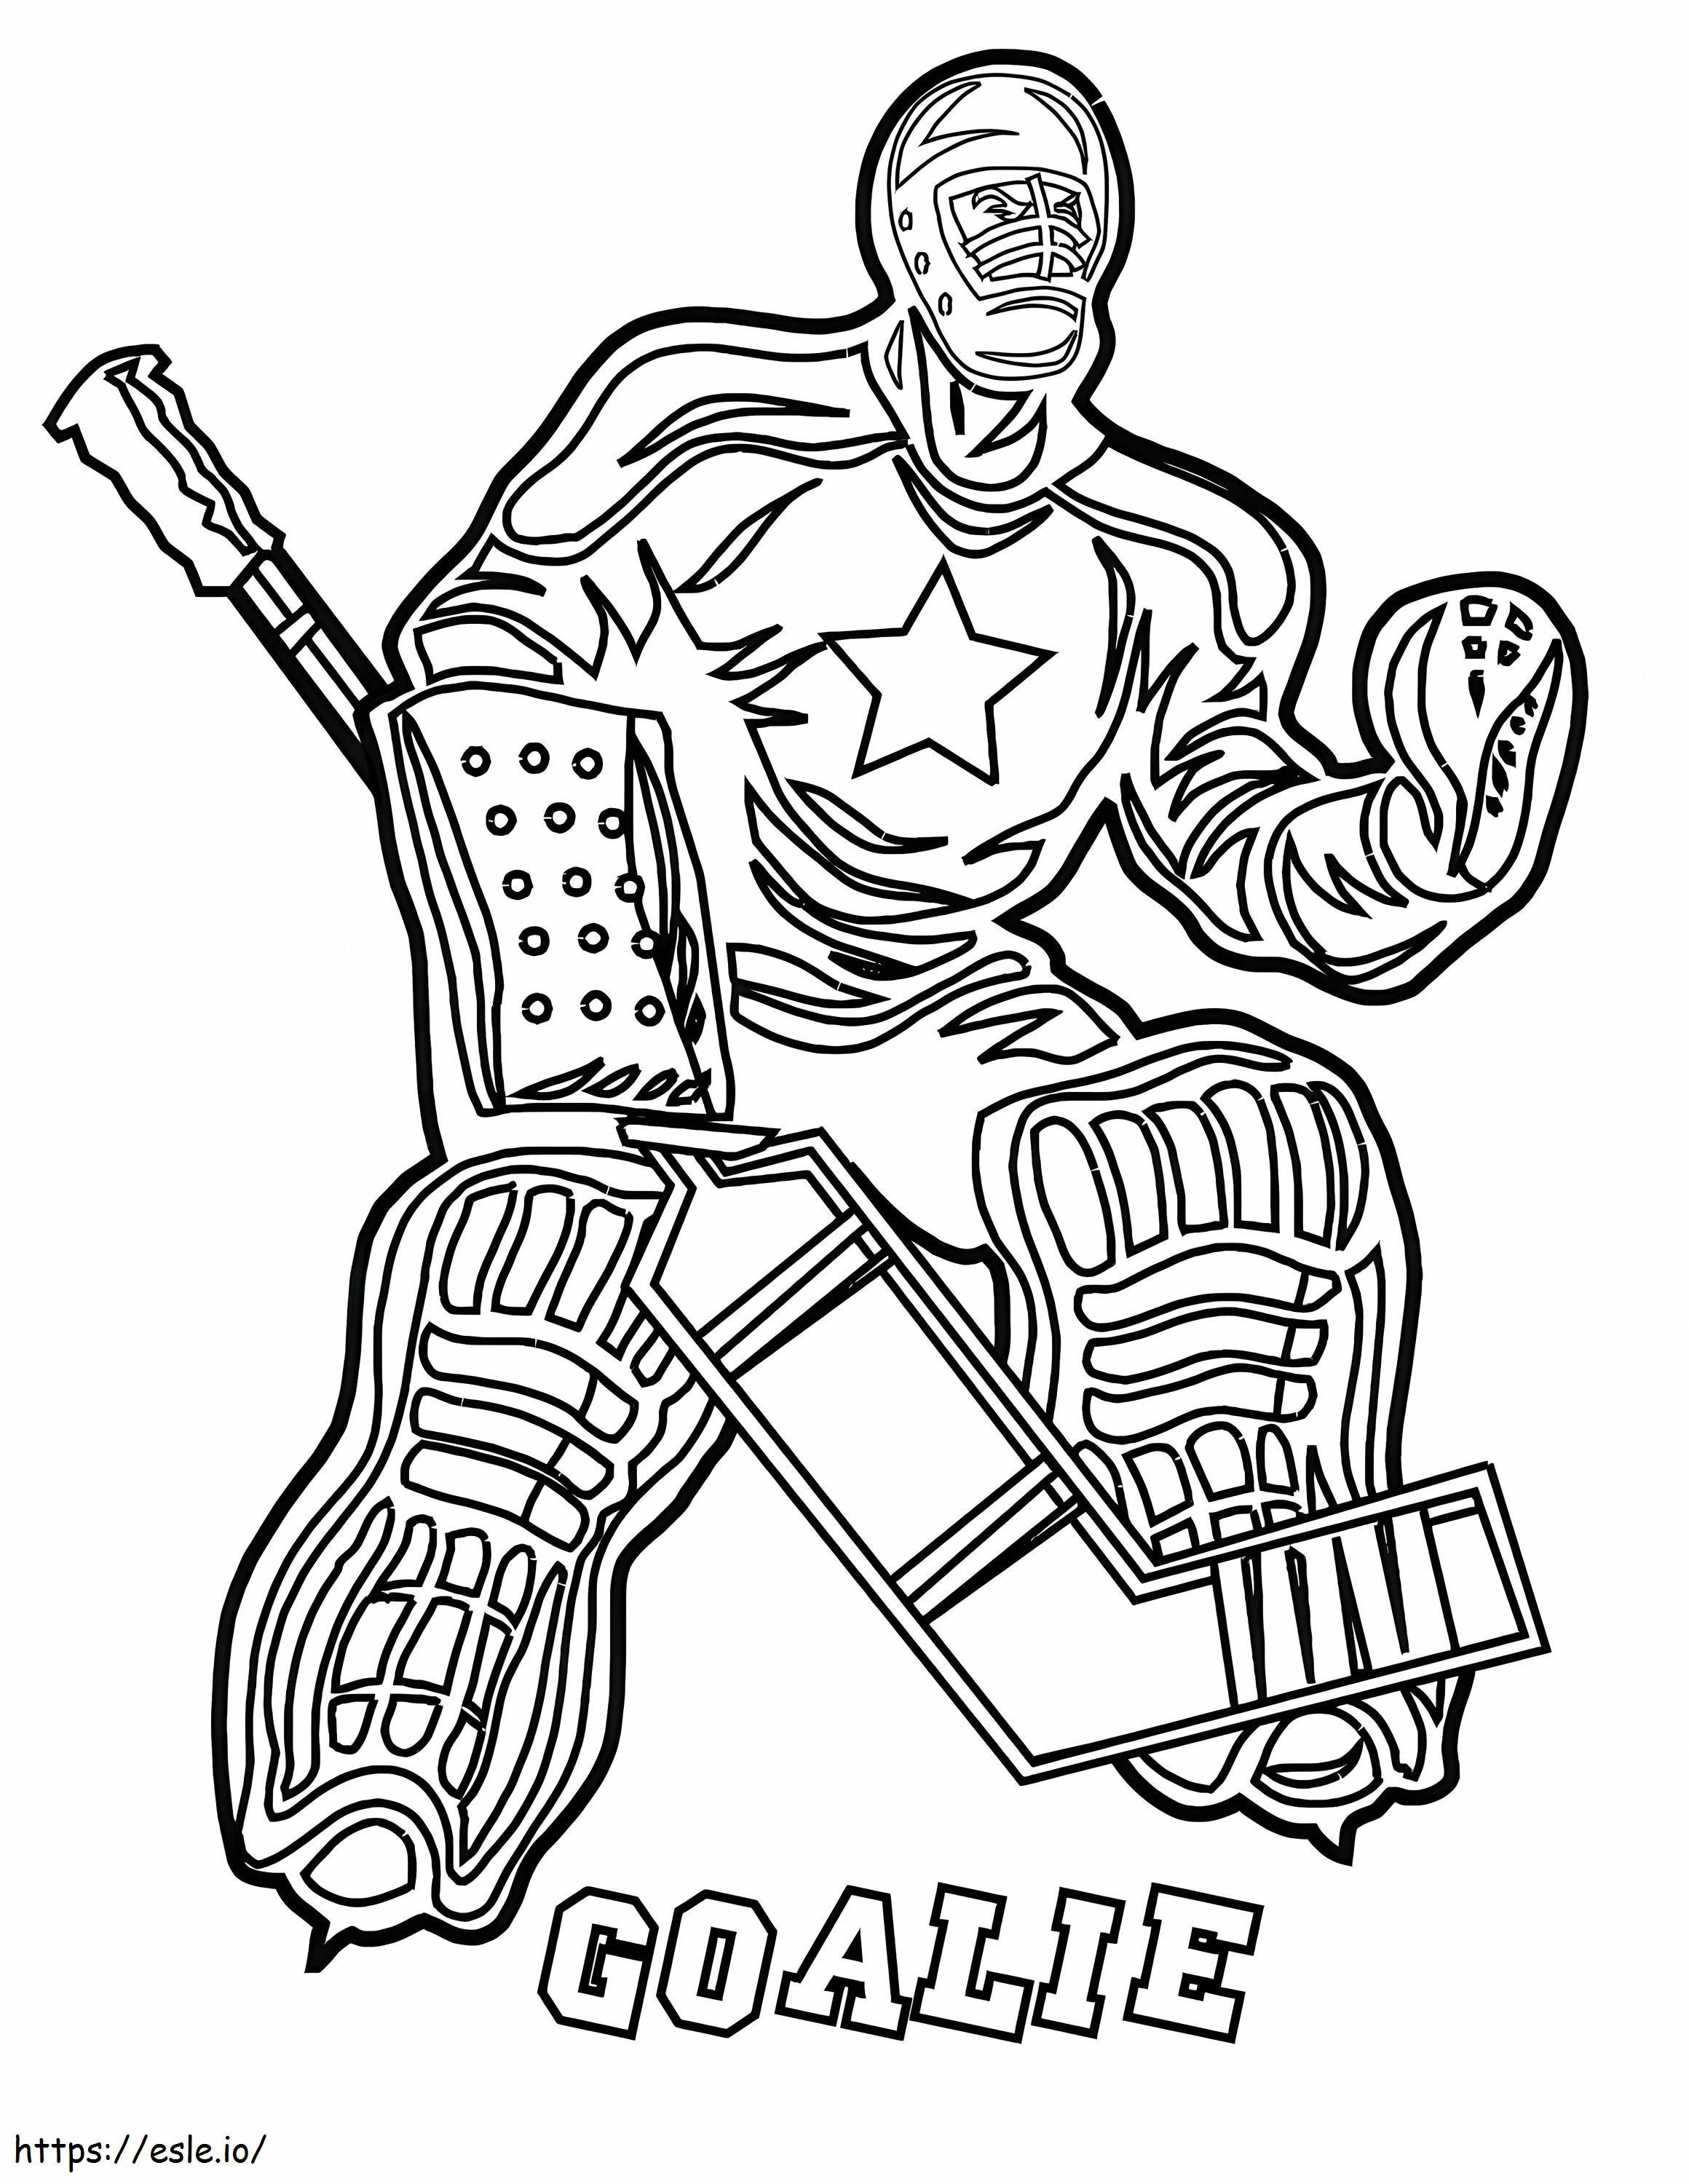 Hockey Goalie coloring page